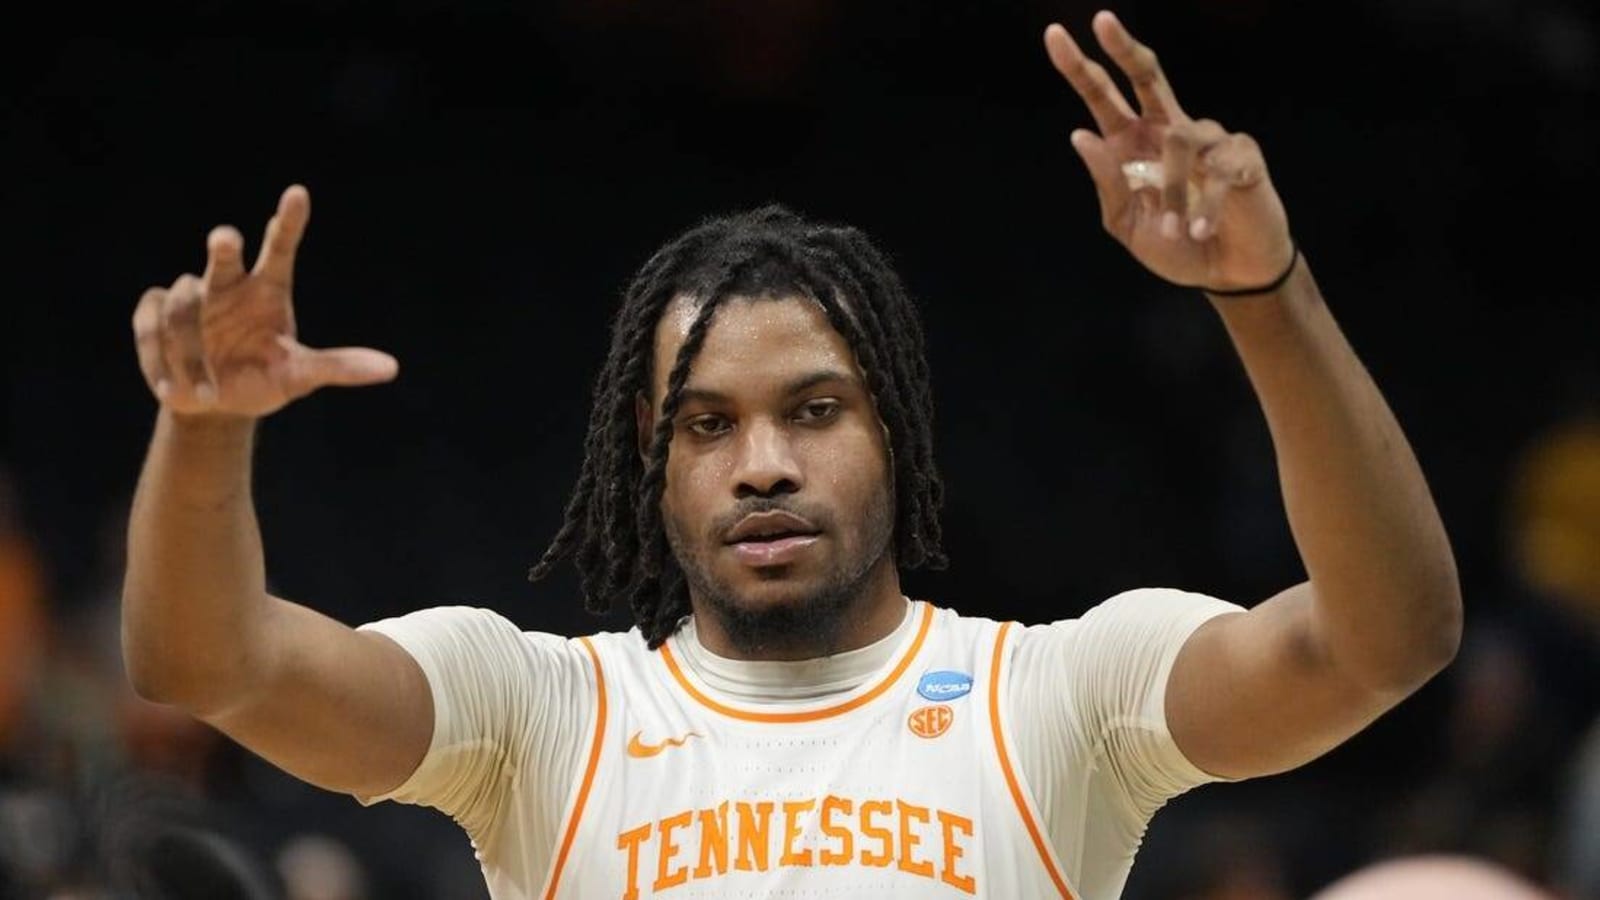 Tennessee hangs on to edge Texas, move on to Sweet 16